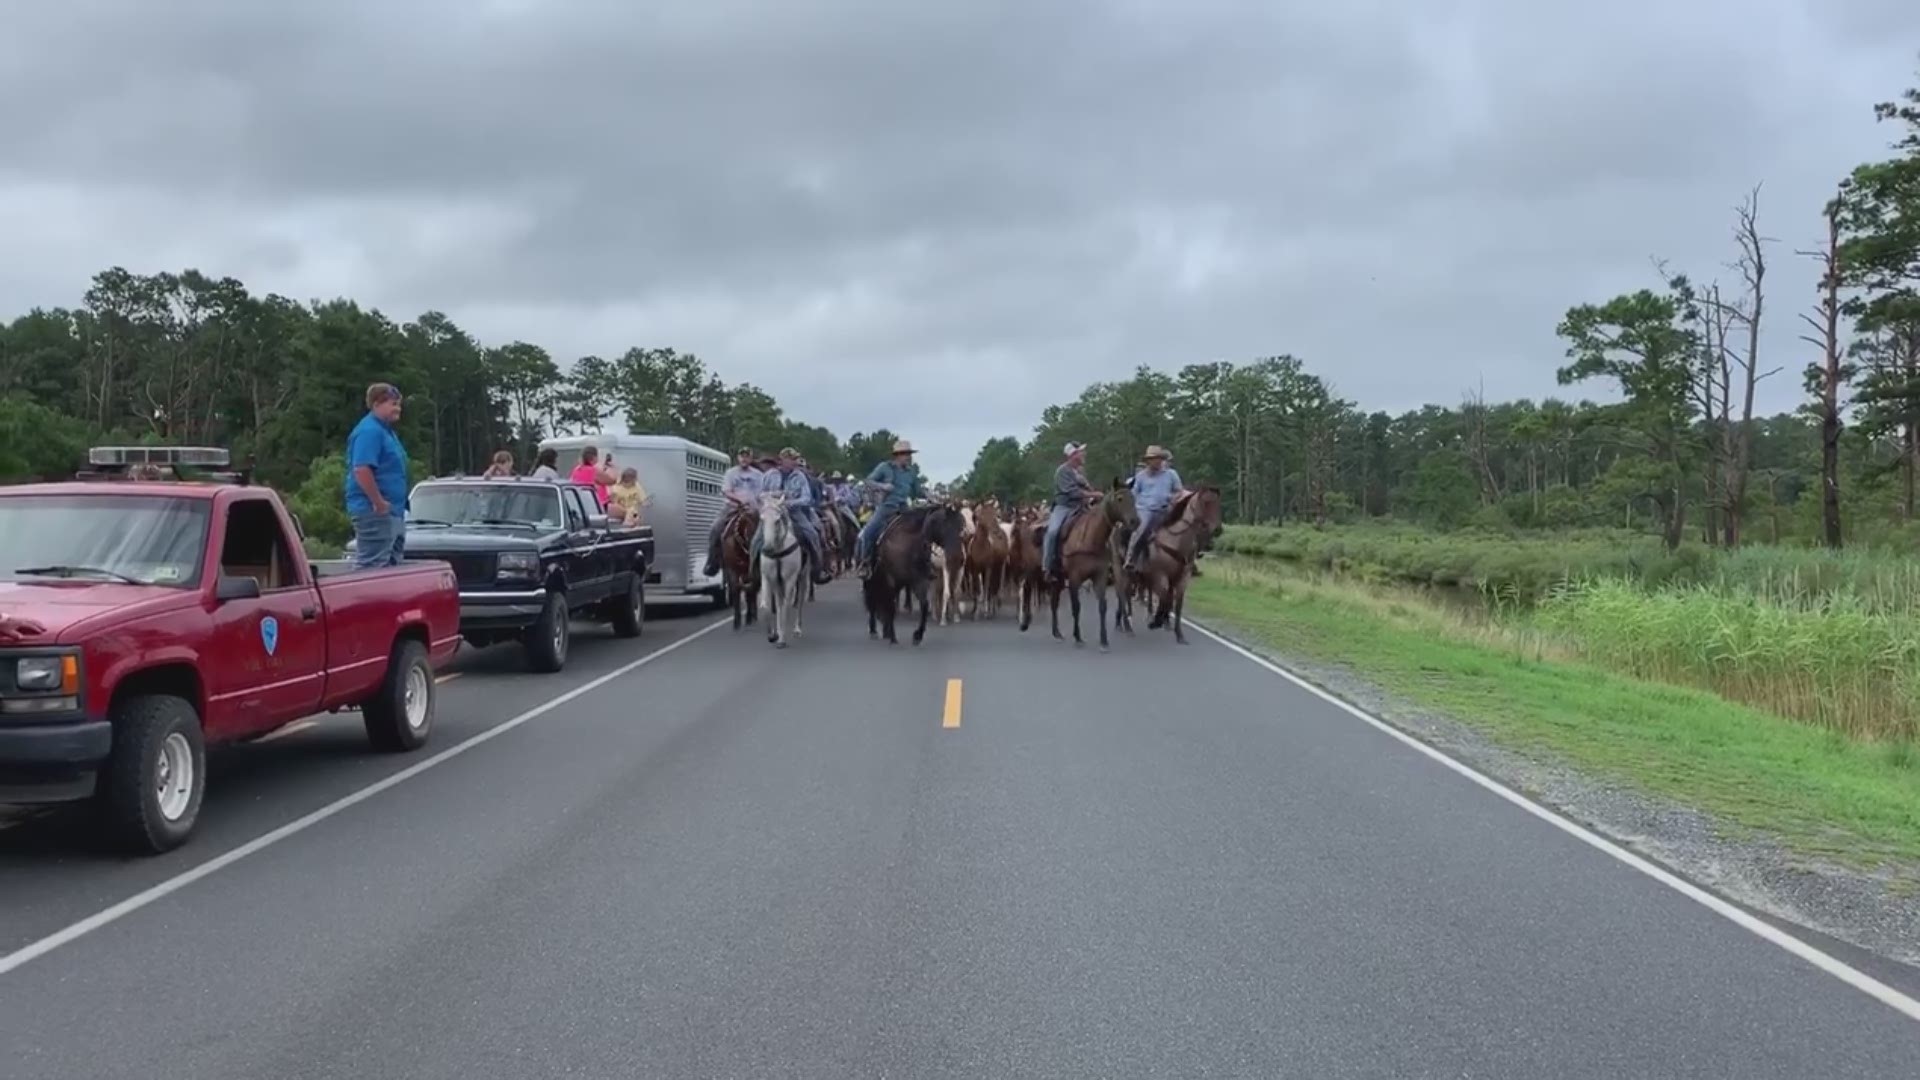 Chincoteague ponies left the corrals early Wednesday morning and headed to the annual Pony Swim. (Credit: Chincoteague Chamber of Commerce and Certified Visitor Center)